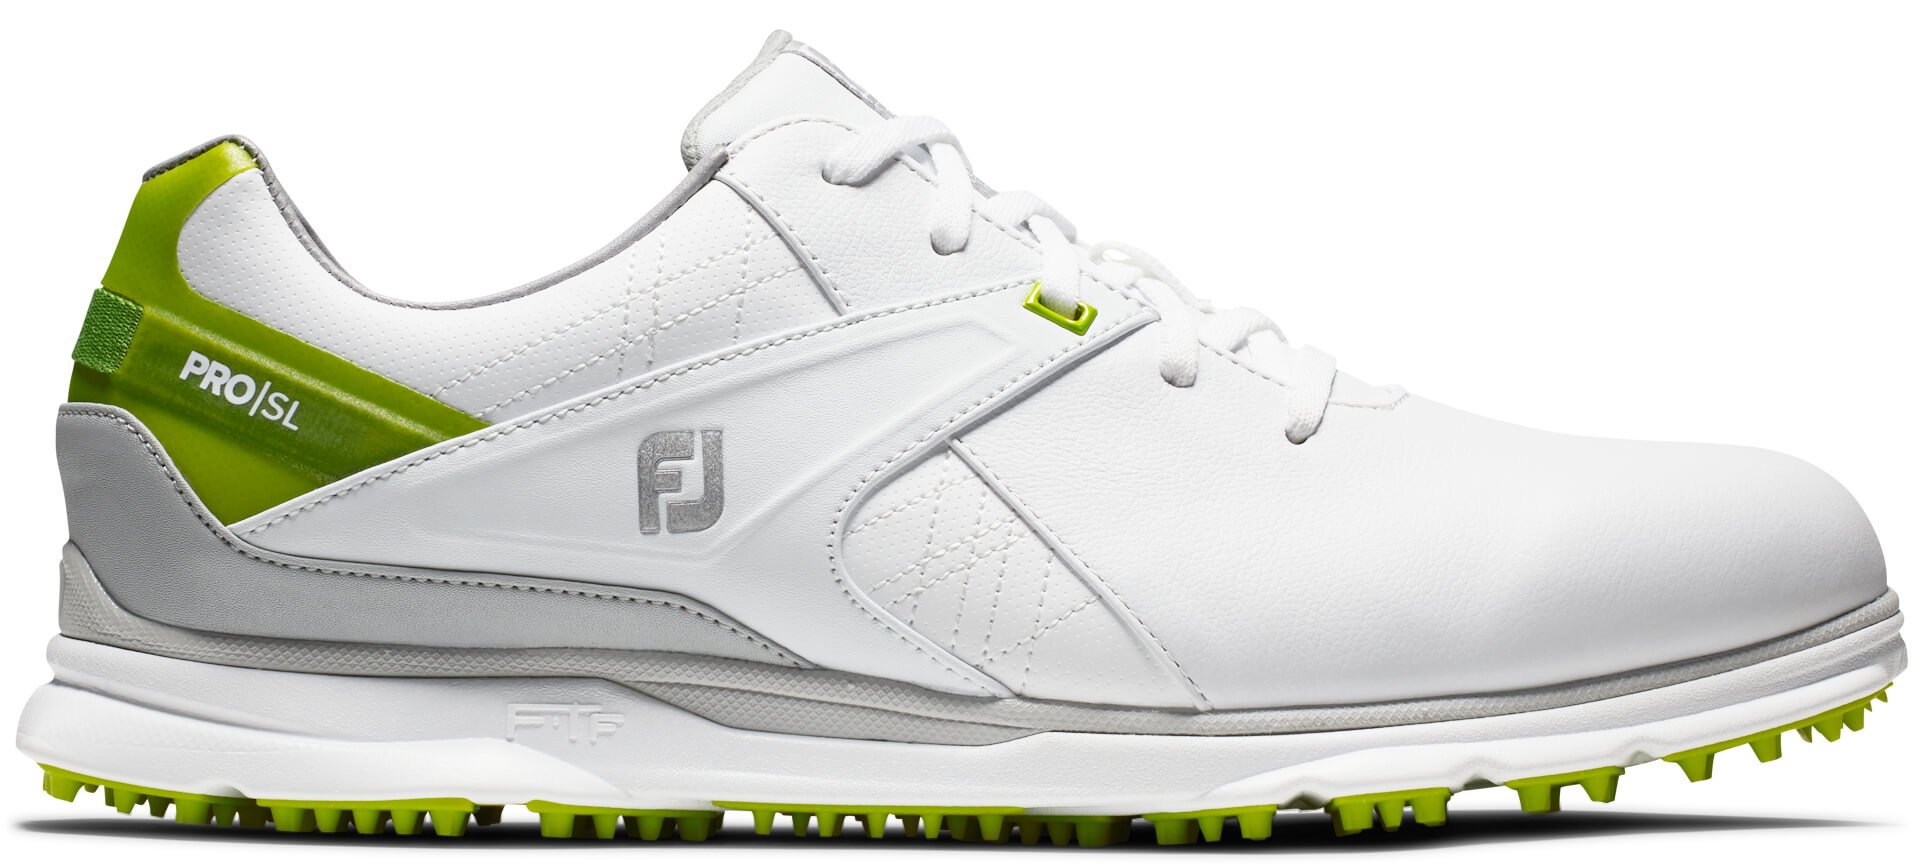 Save 47% on Footjoy Men's Pro Sl Golf Shoes In White/lime, Size 7, Medium